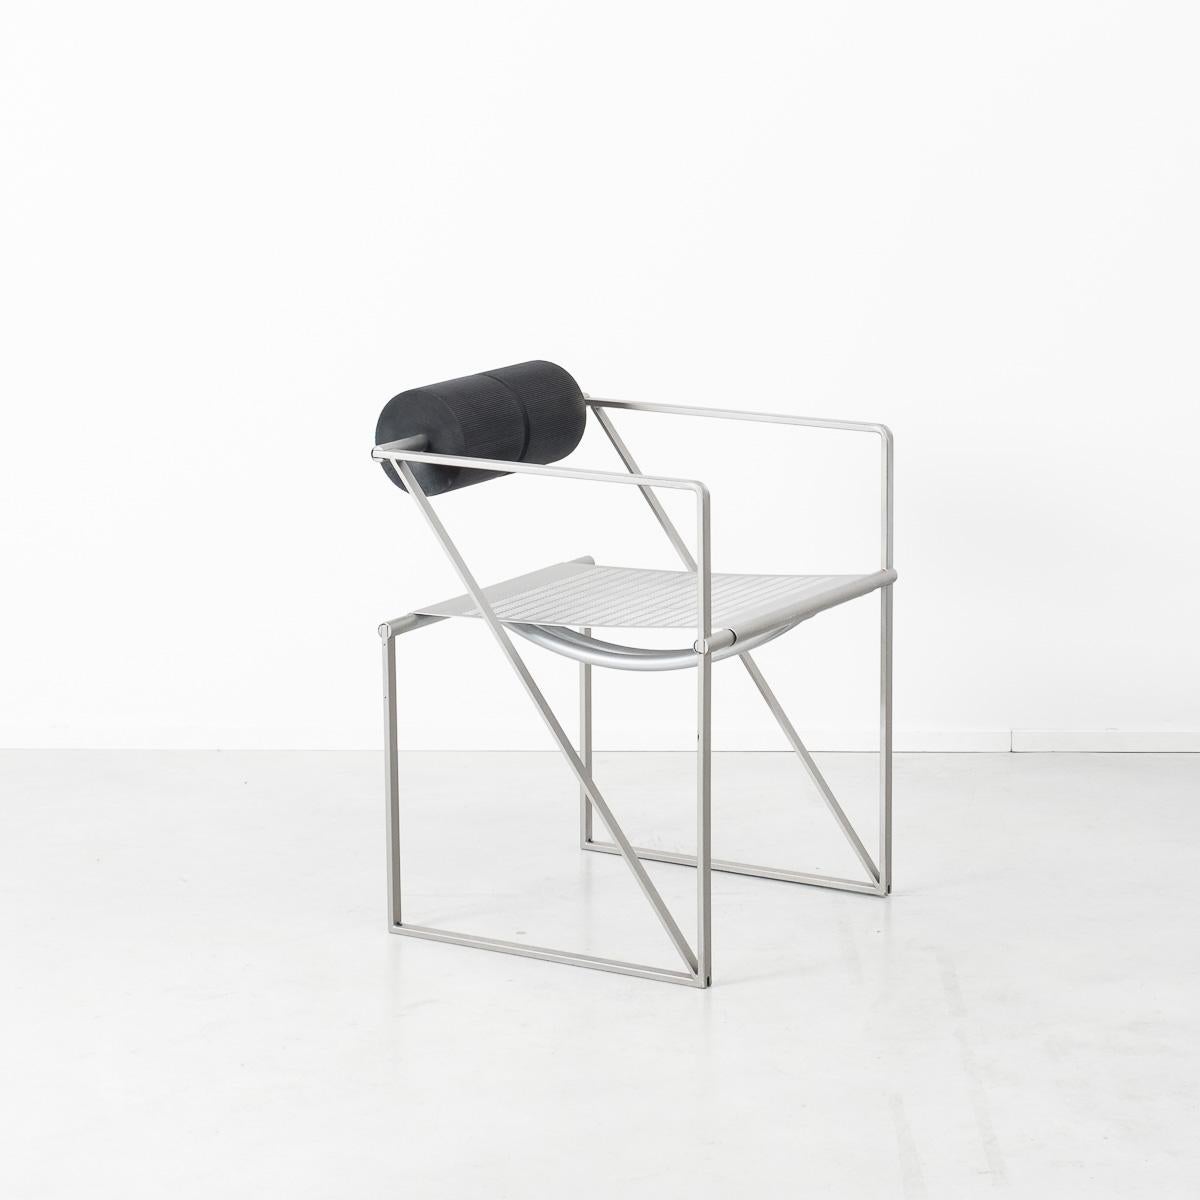 The Seconda chair is perhaps one of his most iconic pieces. This set of early period produced chairs are, like most of his designs, are made from metal tubing, flat bar and folded perforated sheet metal. The Seconda chair also noticeably features a